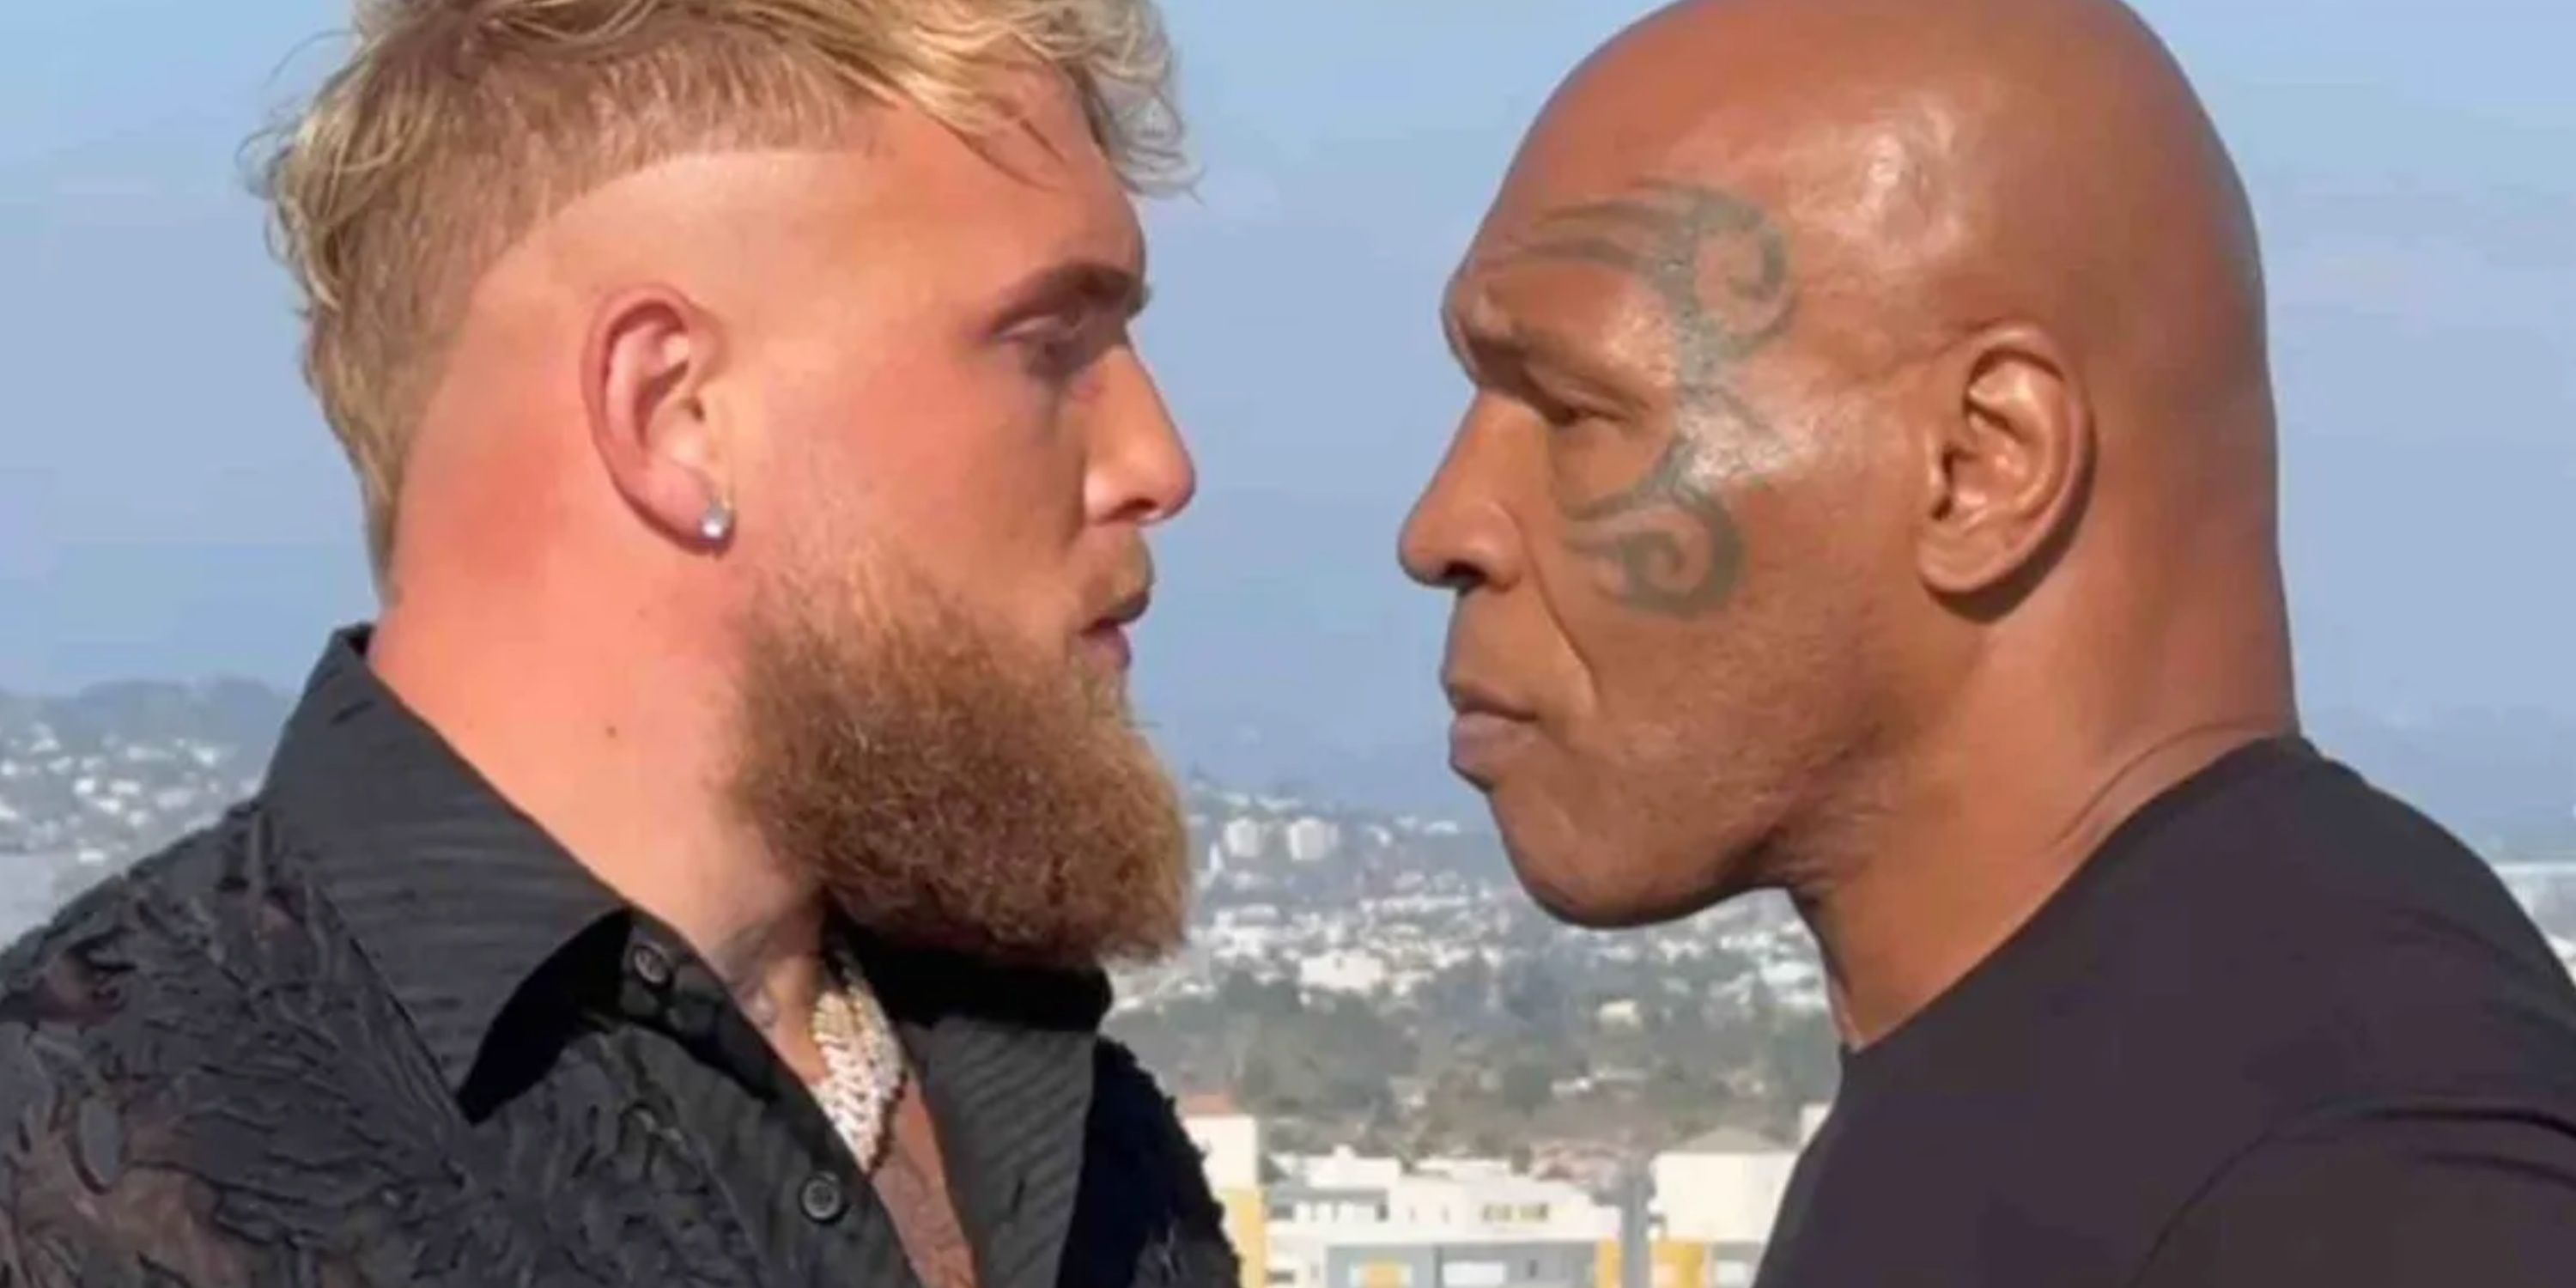 Jake Paul and Mike Tyson face off